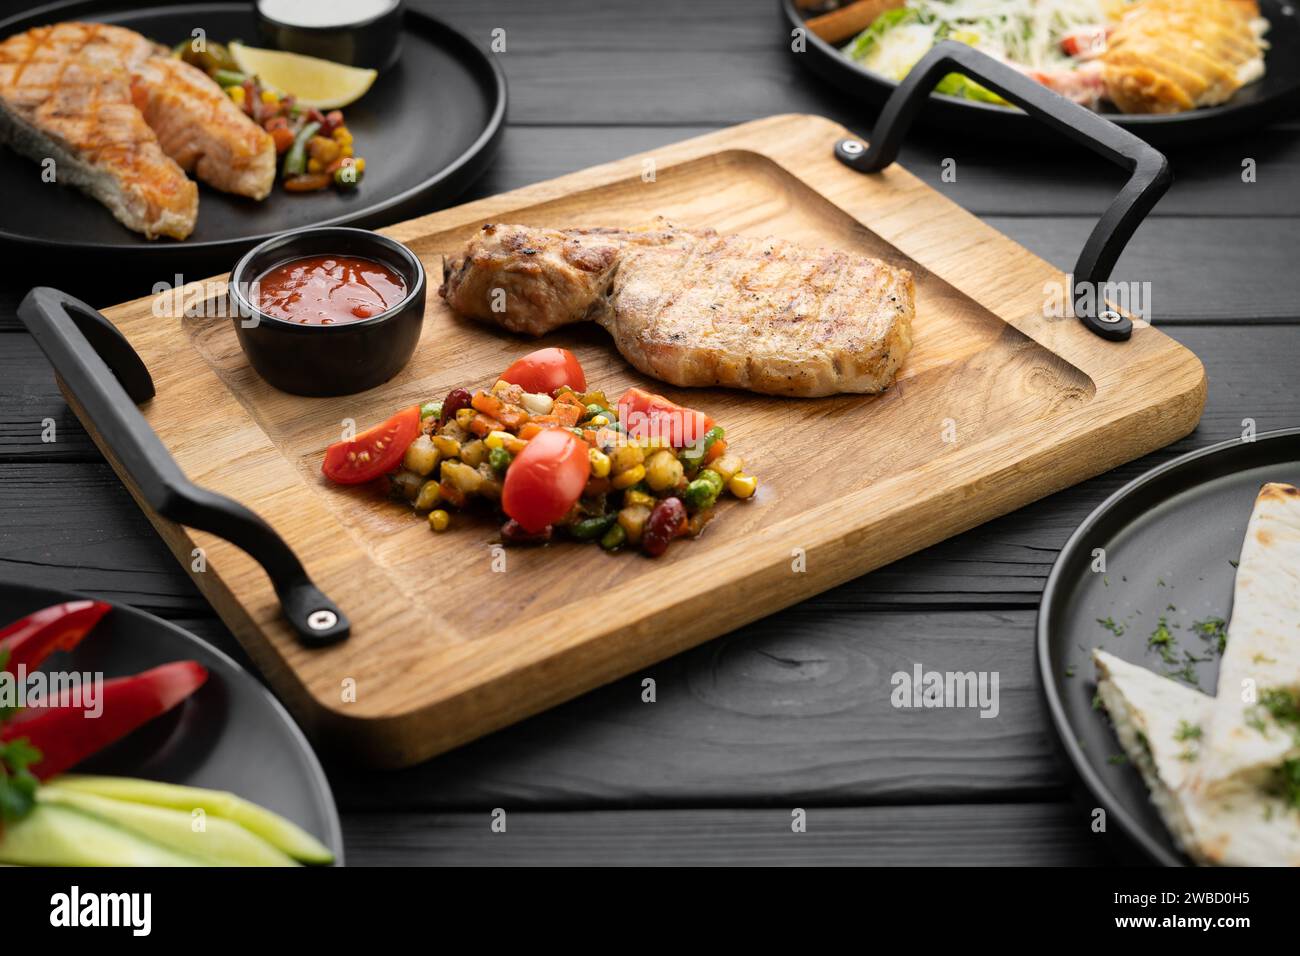 Grilled steak, fish, fillet and ribs served on a wooden table in a restaurant Stock Photo